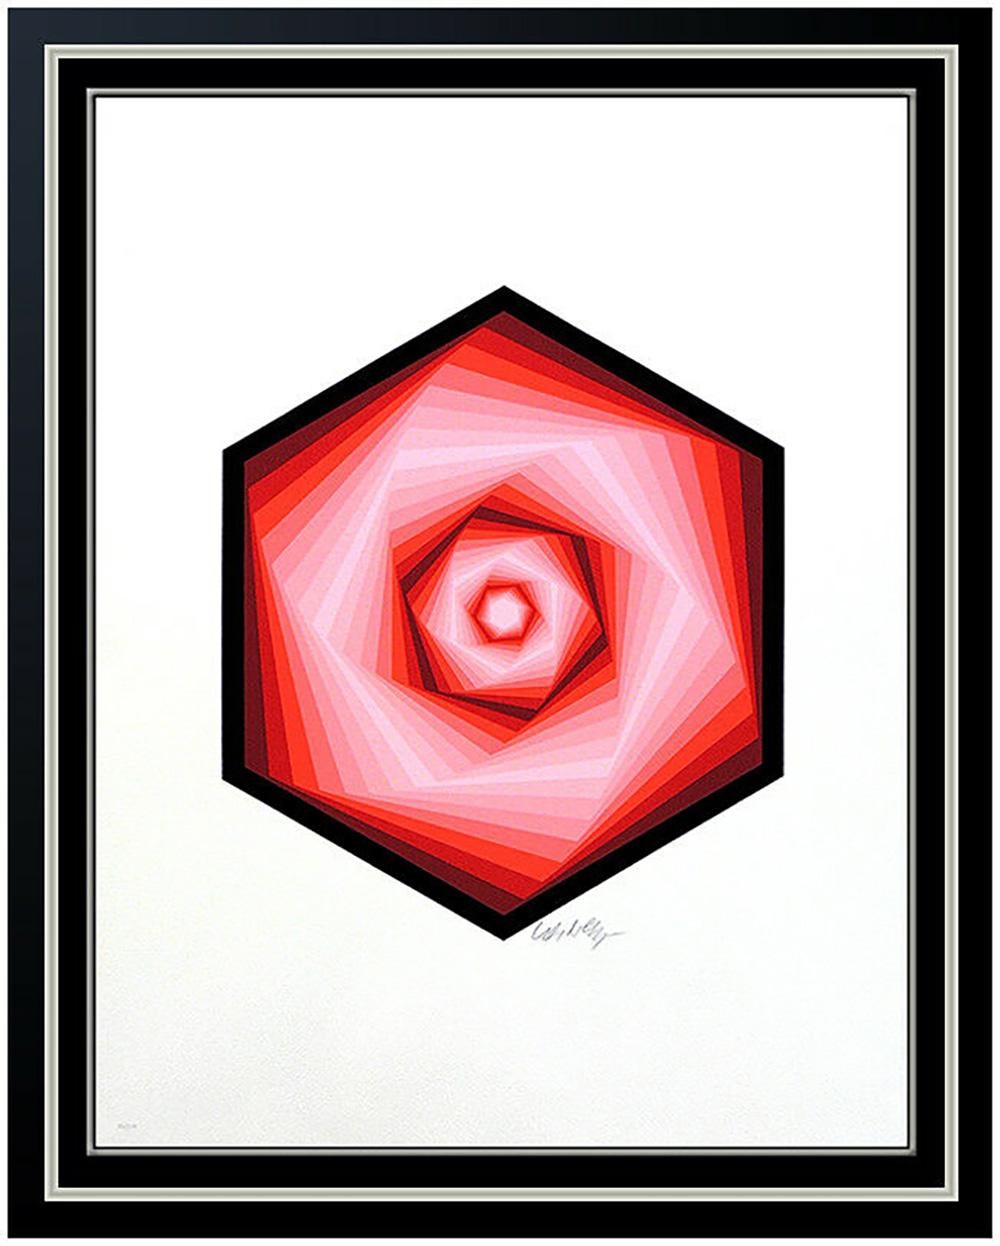 Artist: Victor Vasarely
Title: Red Vega Spiral
Medium: Screen Print and Silkscreen
Edition Number: Edition of 300 (77 of 300)
Artwork Size: 22 x 17.25 Unframed
Frame Size: 30 x 26 Framed